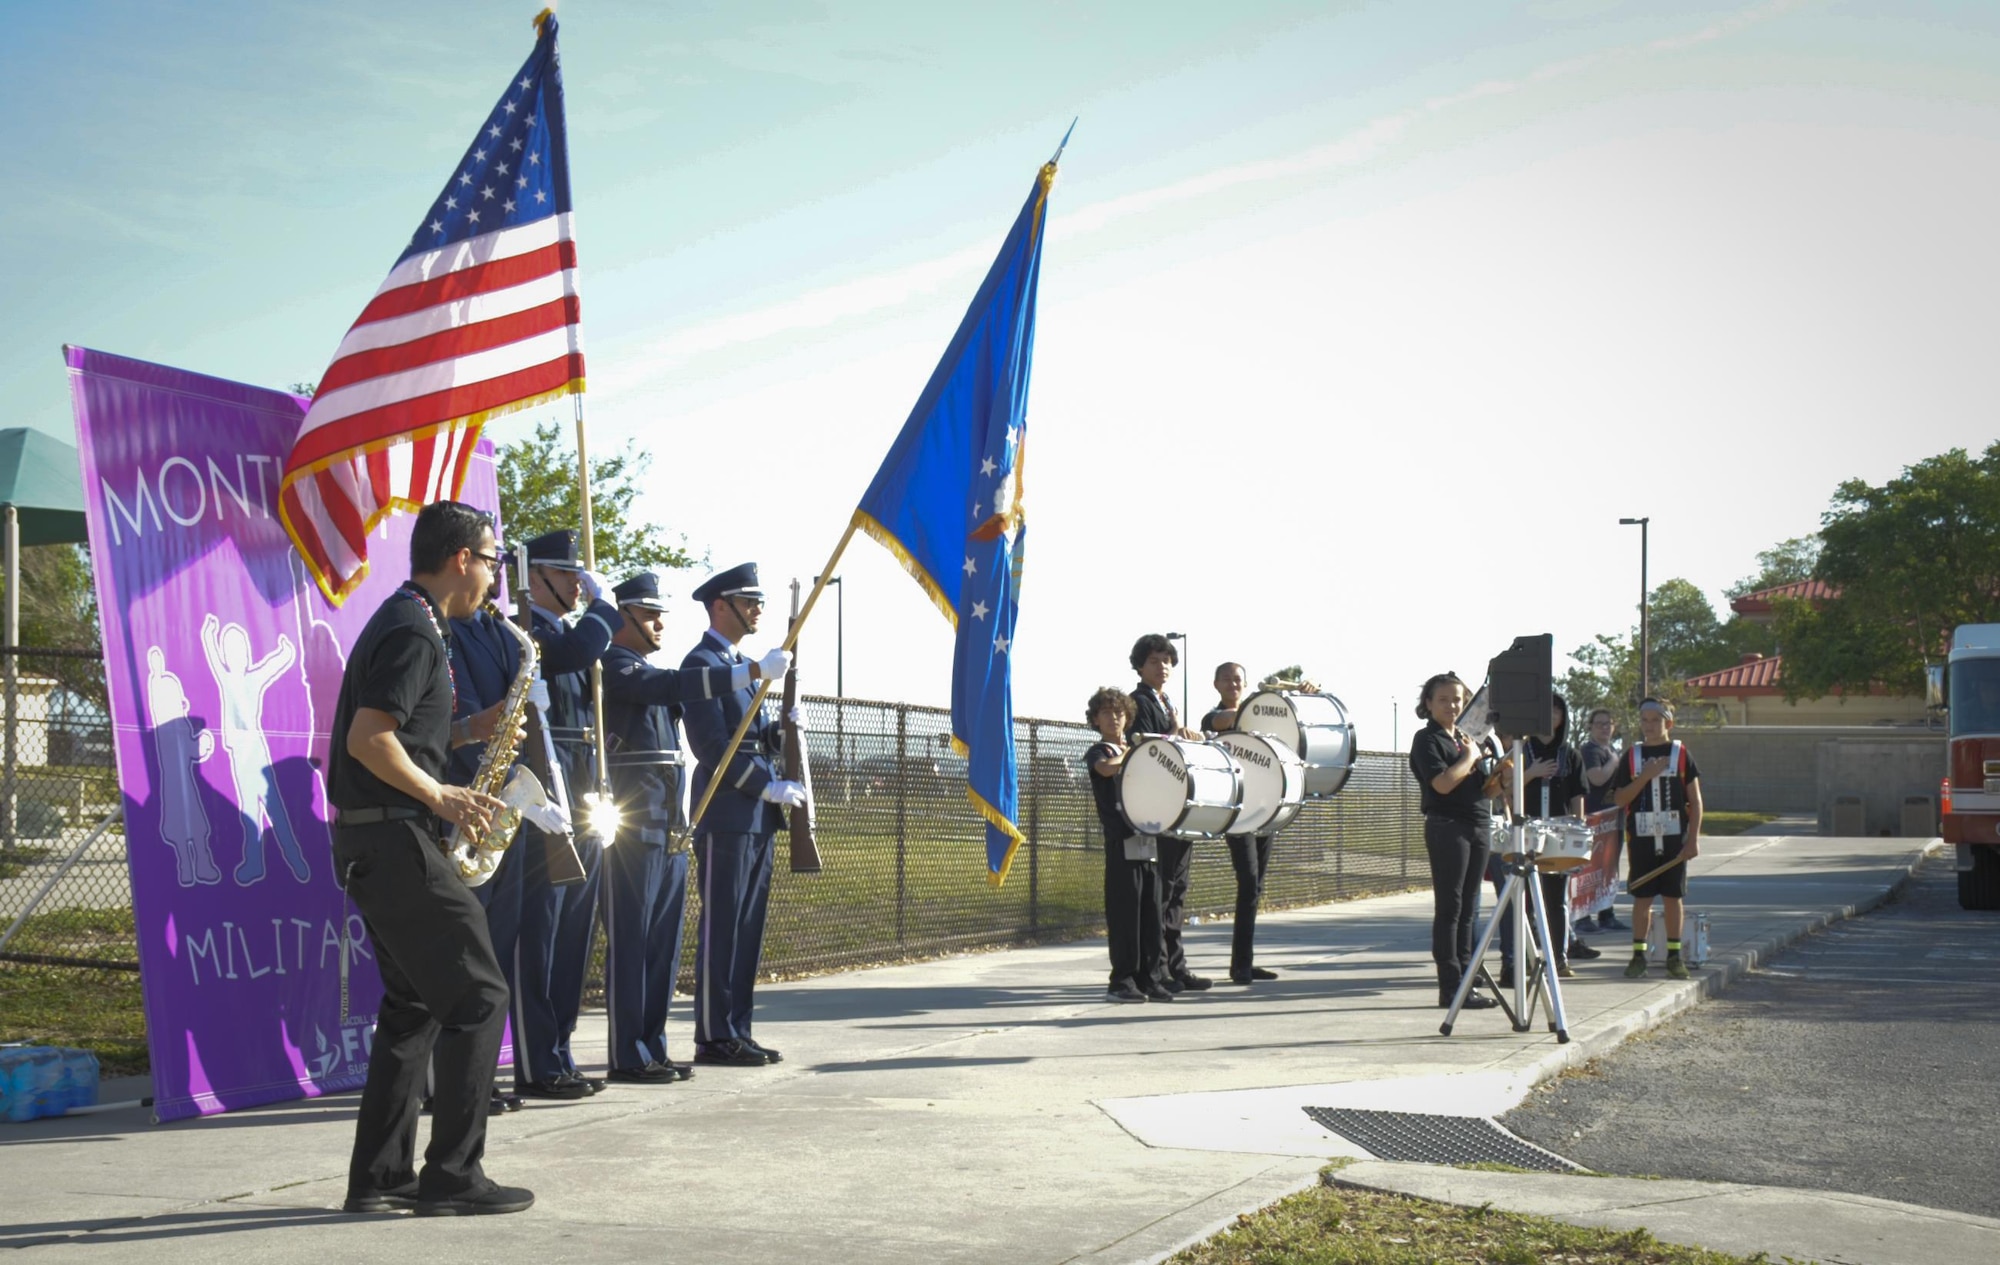 The Robinson Middle School band plays the National Anthem as MacDill’s Base Honor Guard presents the colors before the Month of the Military Child parade at MacDill Air Force Base, Fla., April 21, 2017. Team MacDill came together and lined the parade route to show support to their military children. (U.S. Air Force photo by Airman 1st Class Mariette Adams)